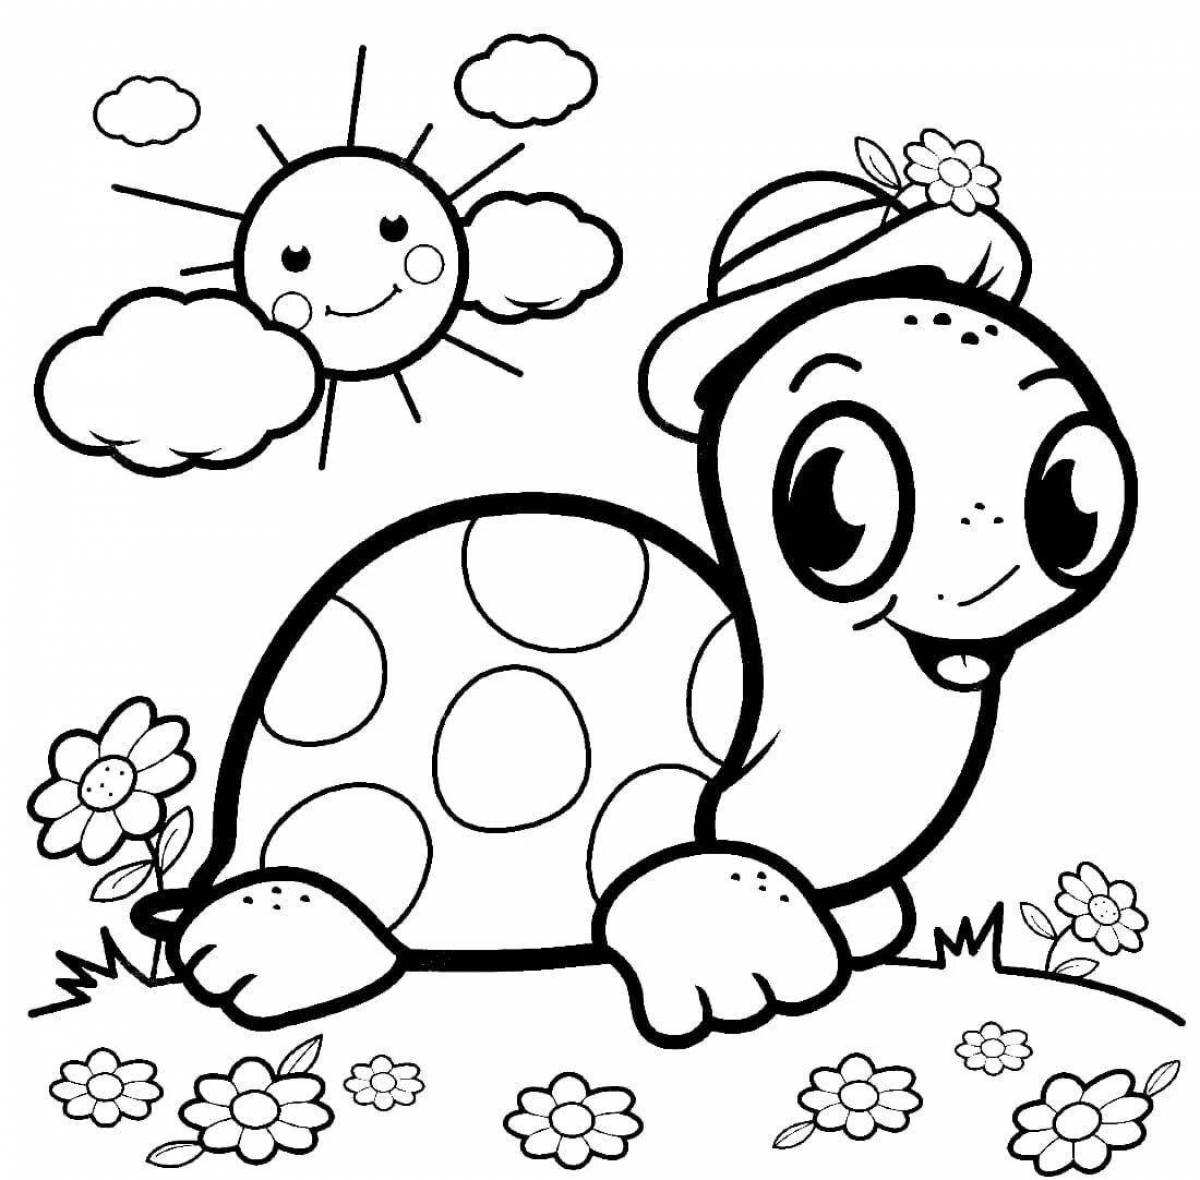 Fun turtle coloring book for 3-4 year olds